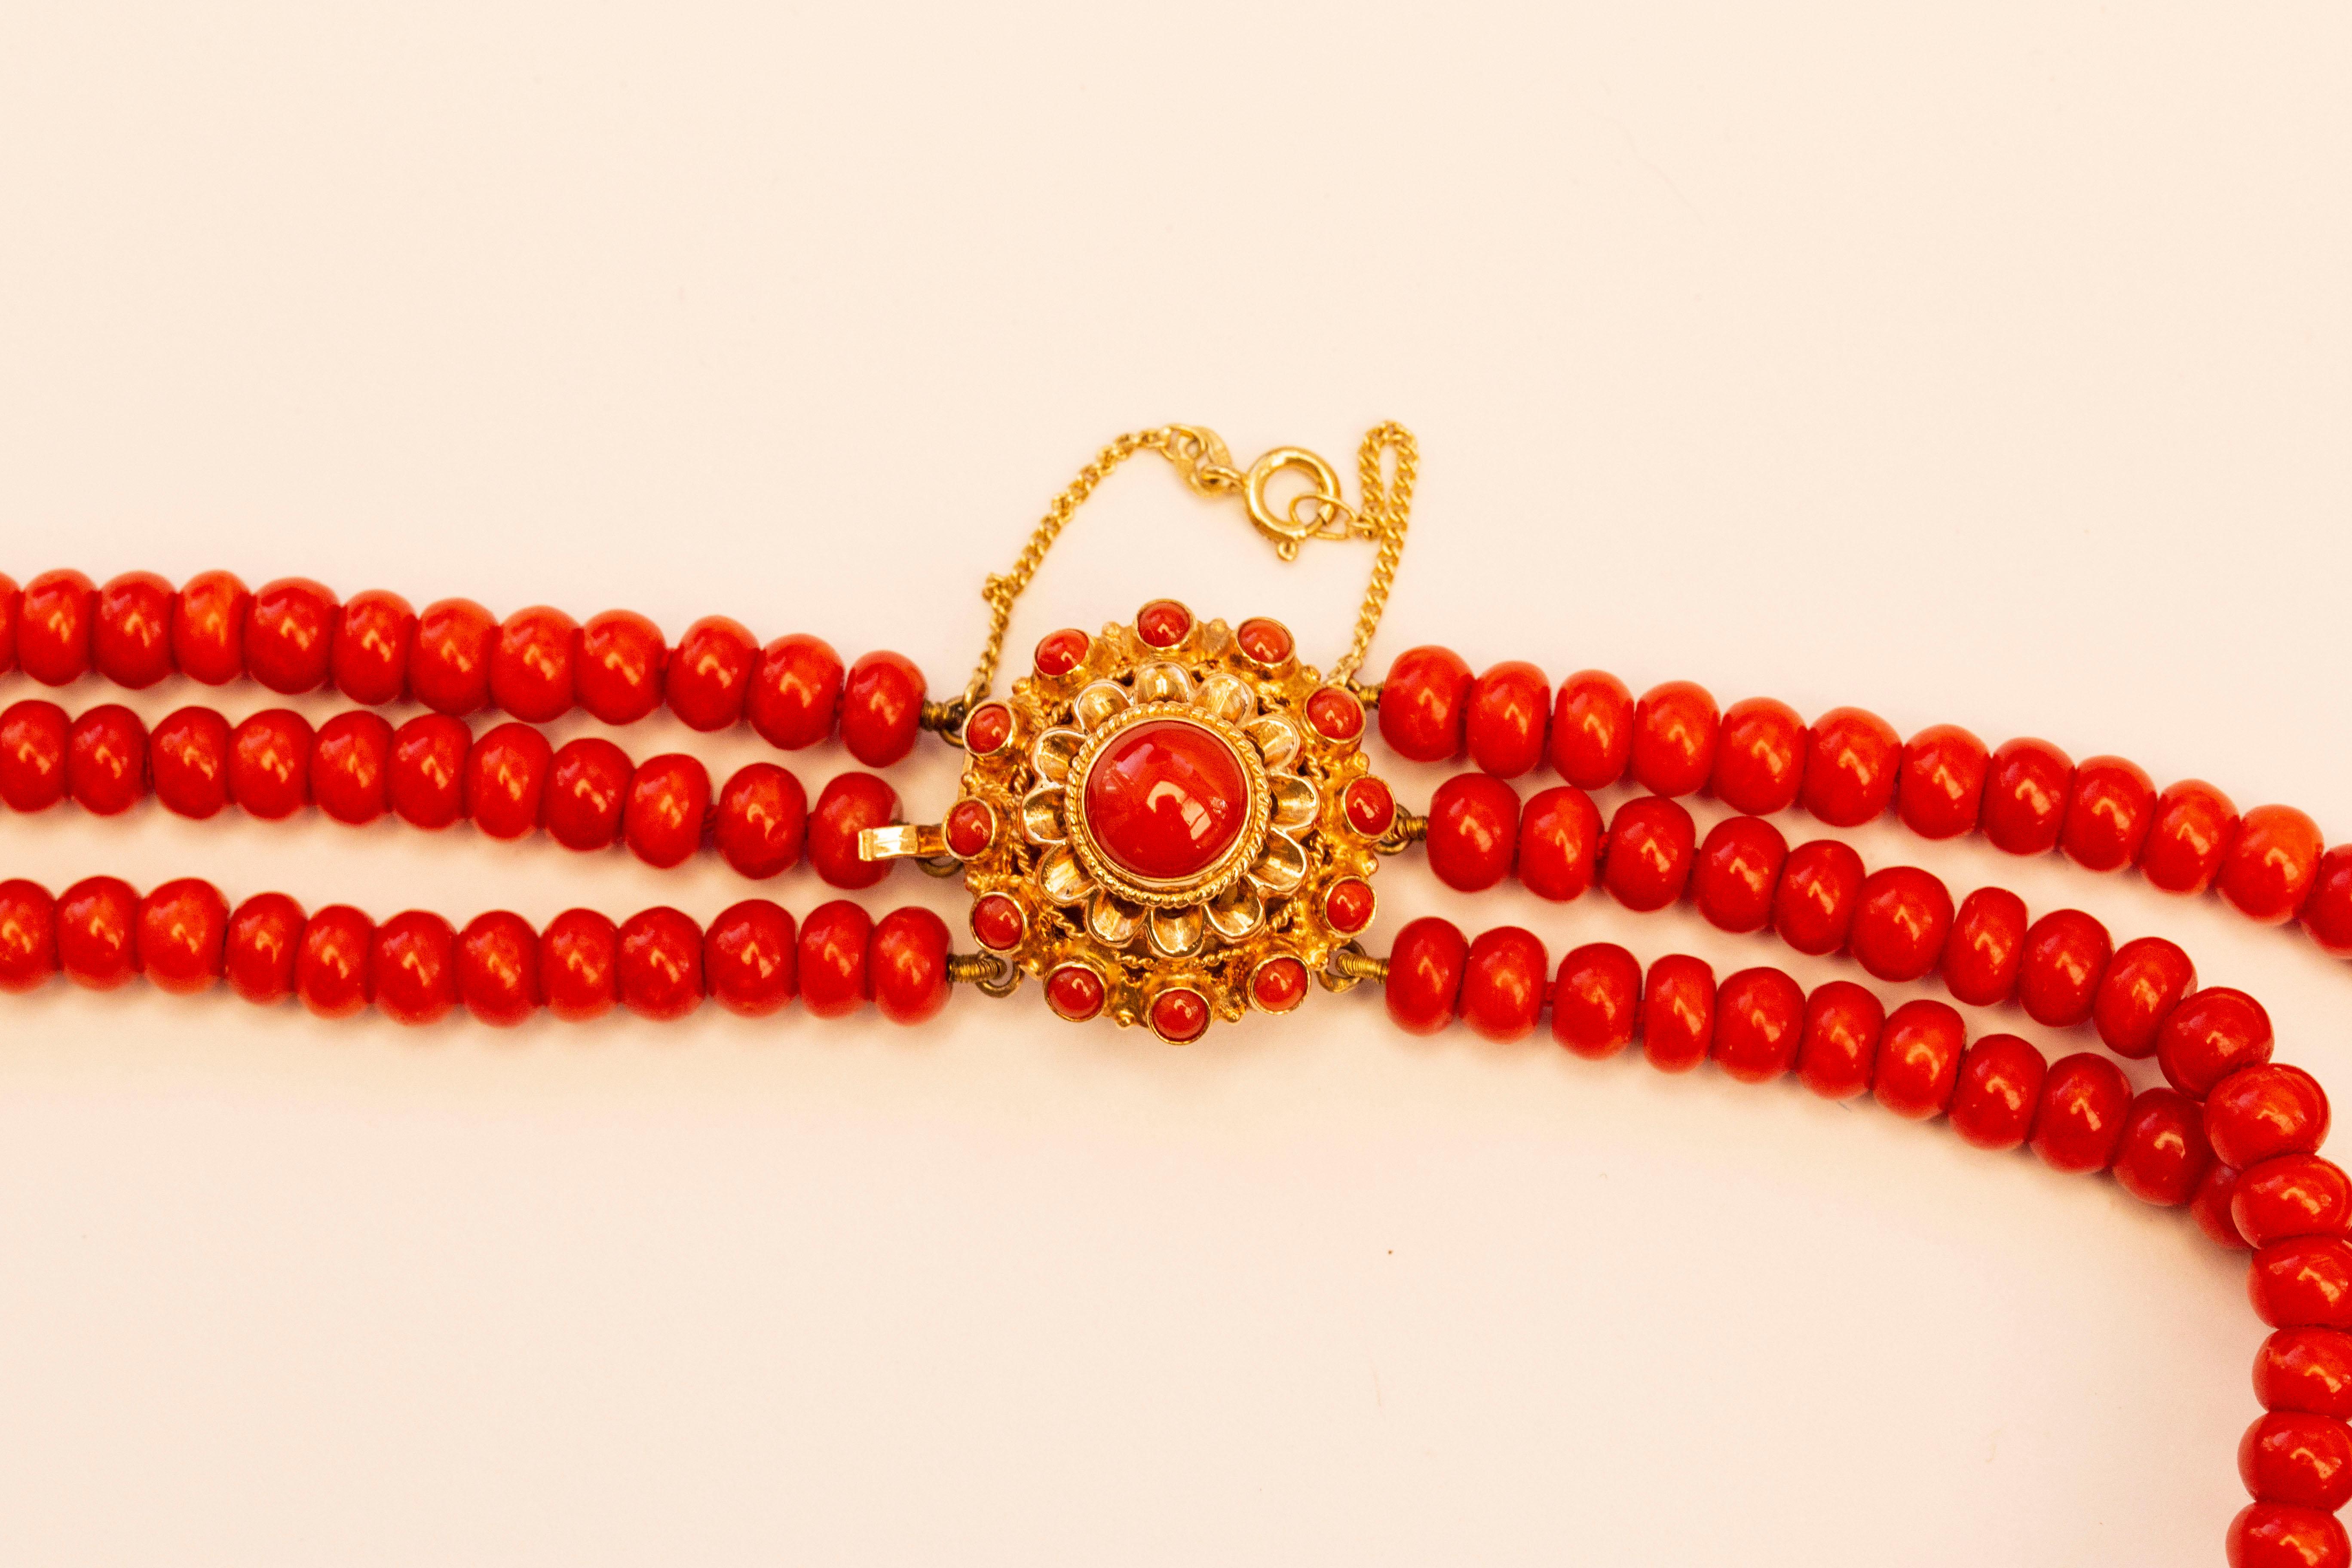 Antique Dutch 3-Row Red Coral Necklace Choker with Filigree 14 Karat Gold Clasp In Excellent Condition For Sale In Arnhem, NL